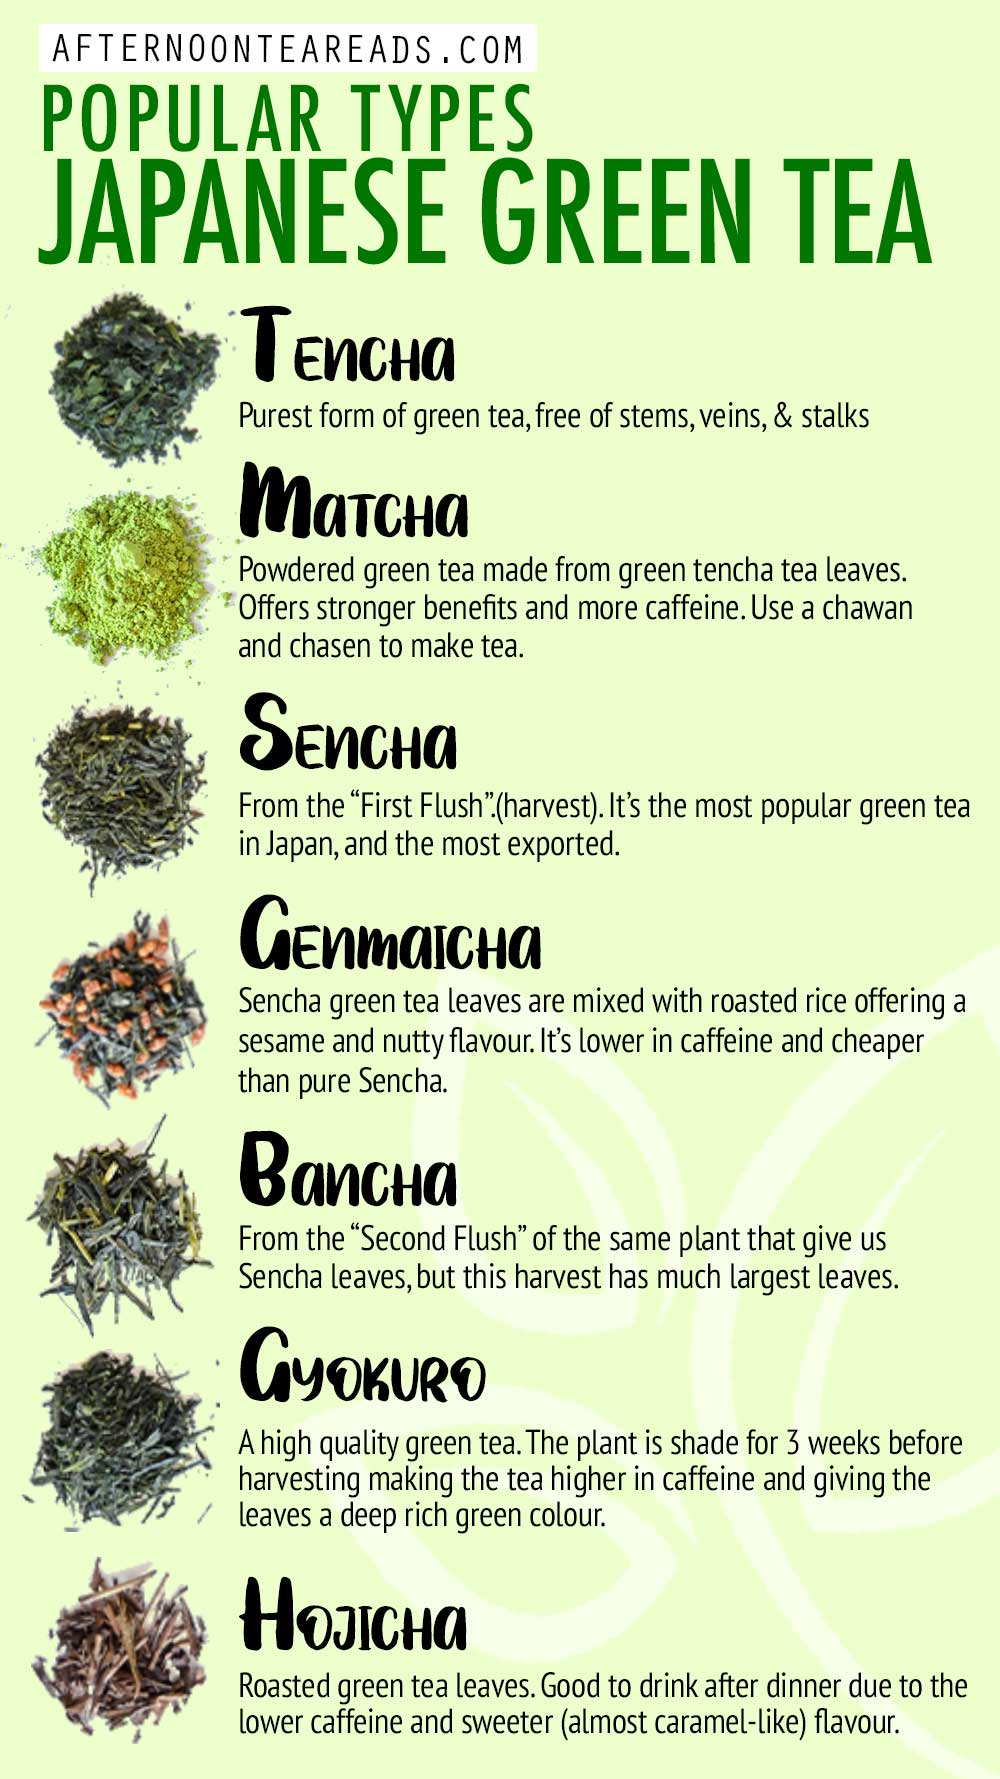 What Are The Different Types of Japanese Green Tea? Afternoon Tea Reads